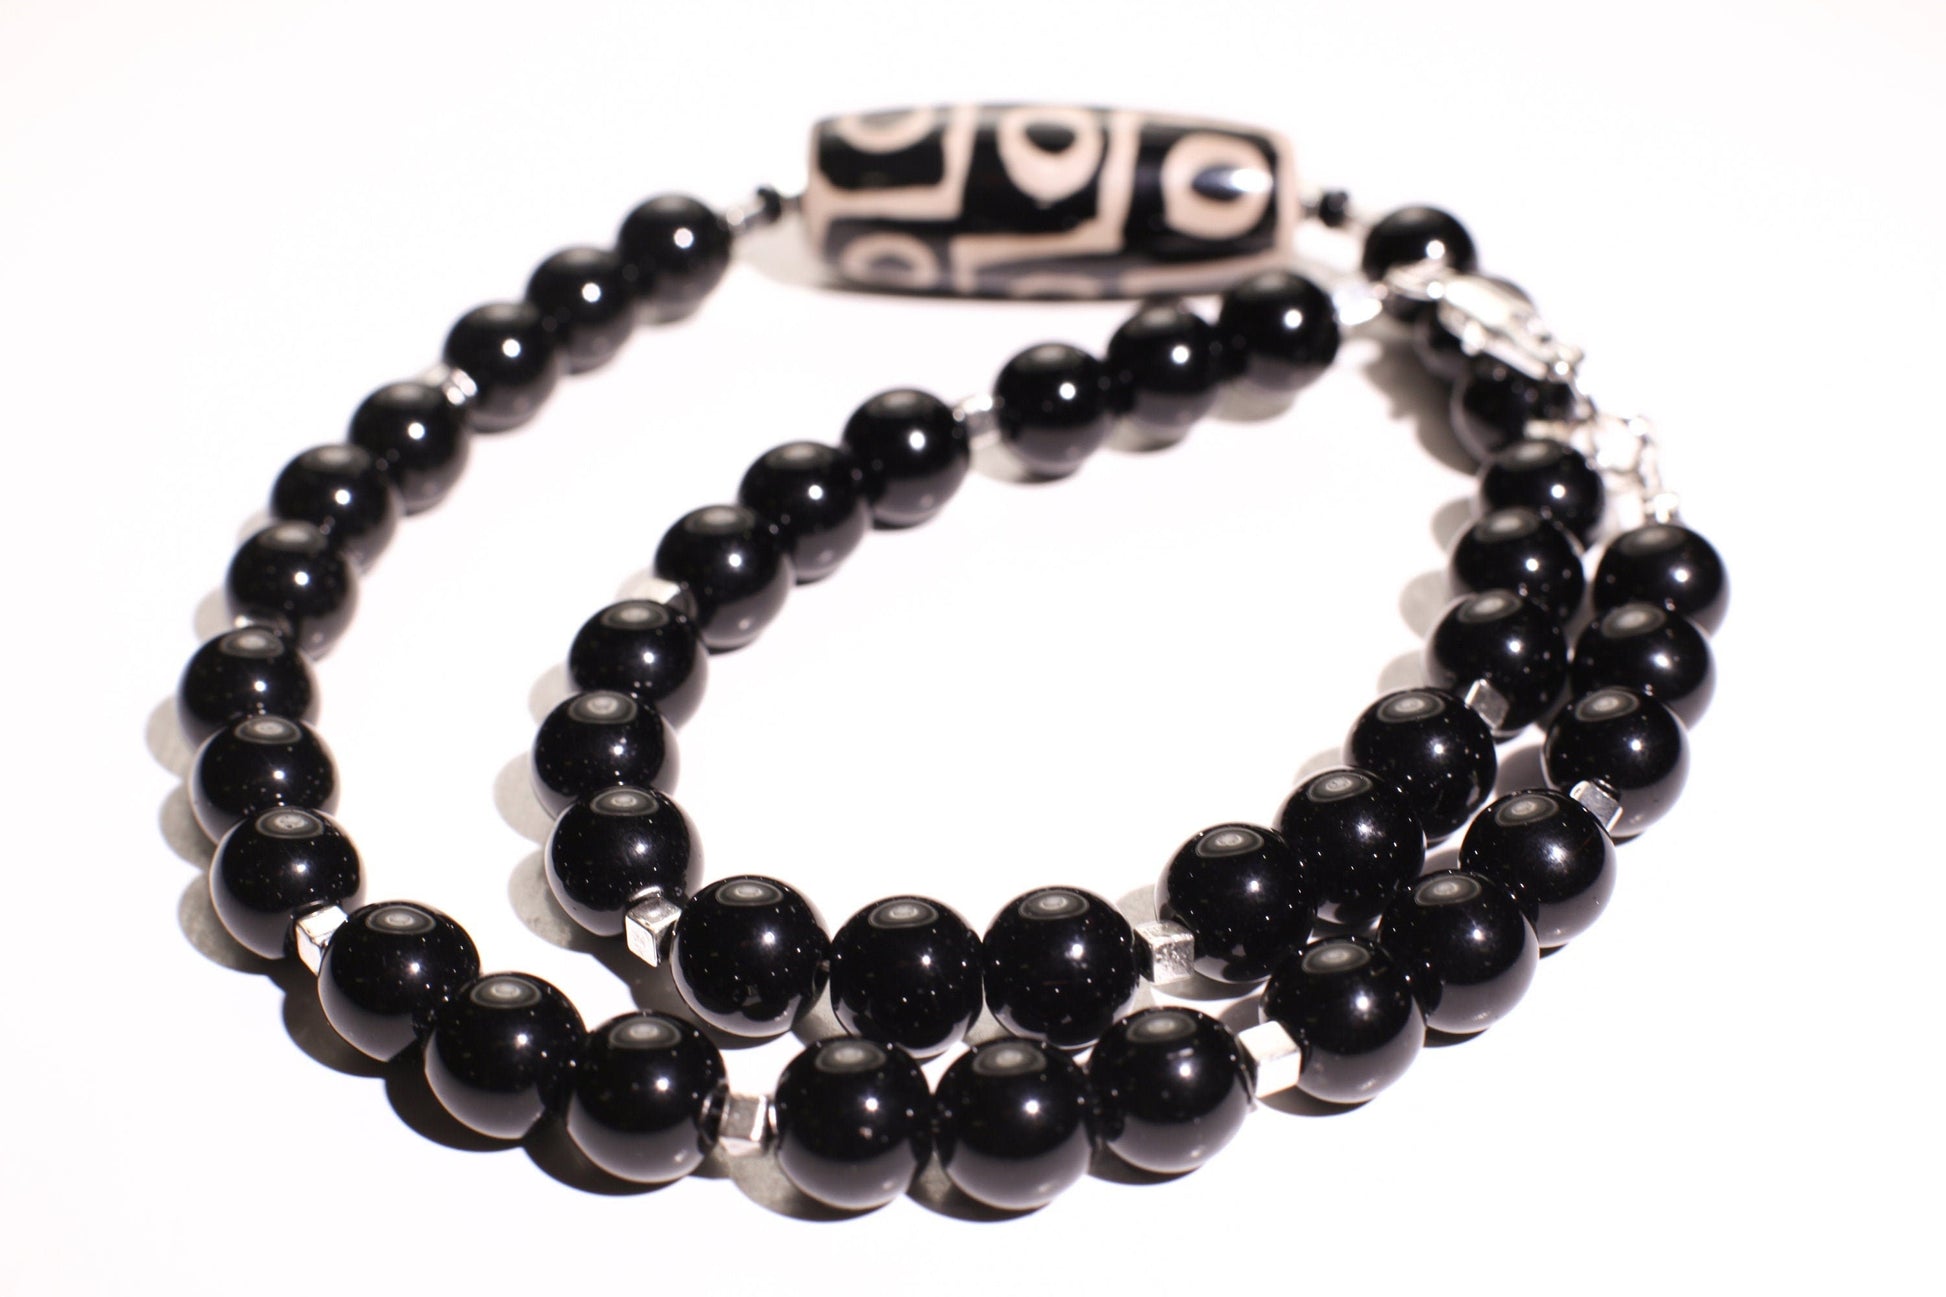 Black Onyx 10mm round bead with Tibetan Evil Eye Agate 16x40mm Puffed Oval center piece Necklace, protection , Man and Woman gift